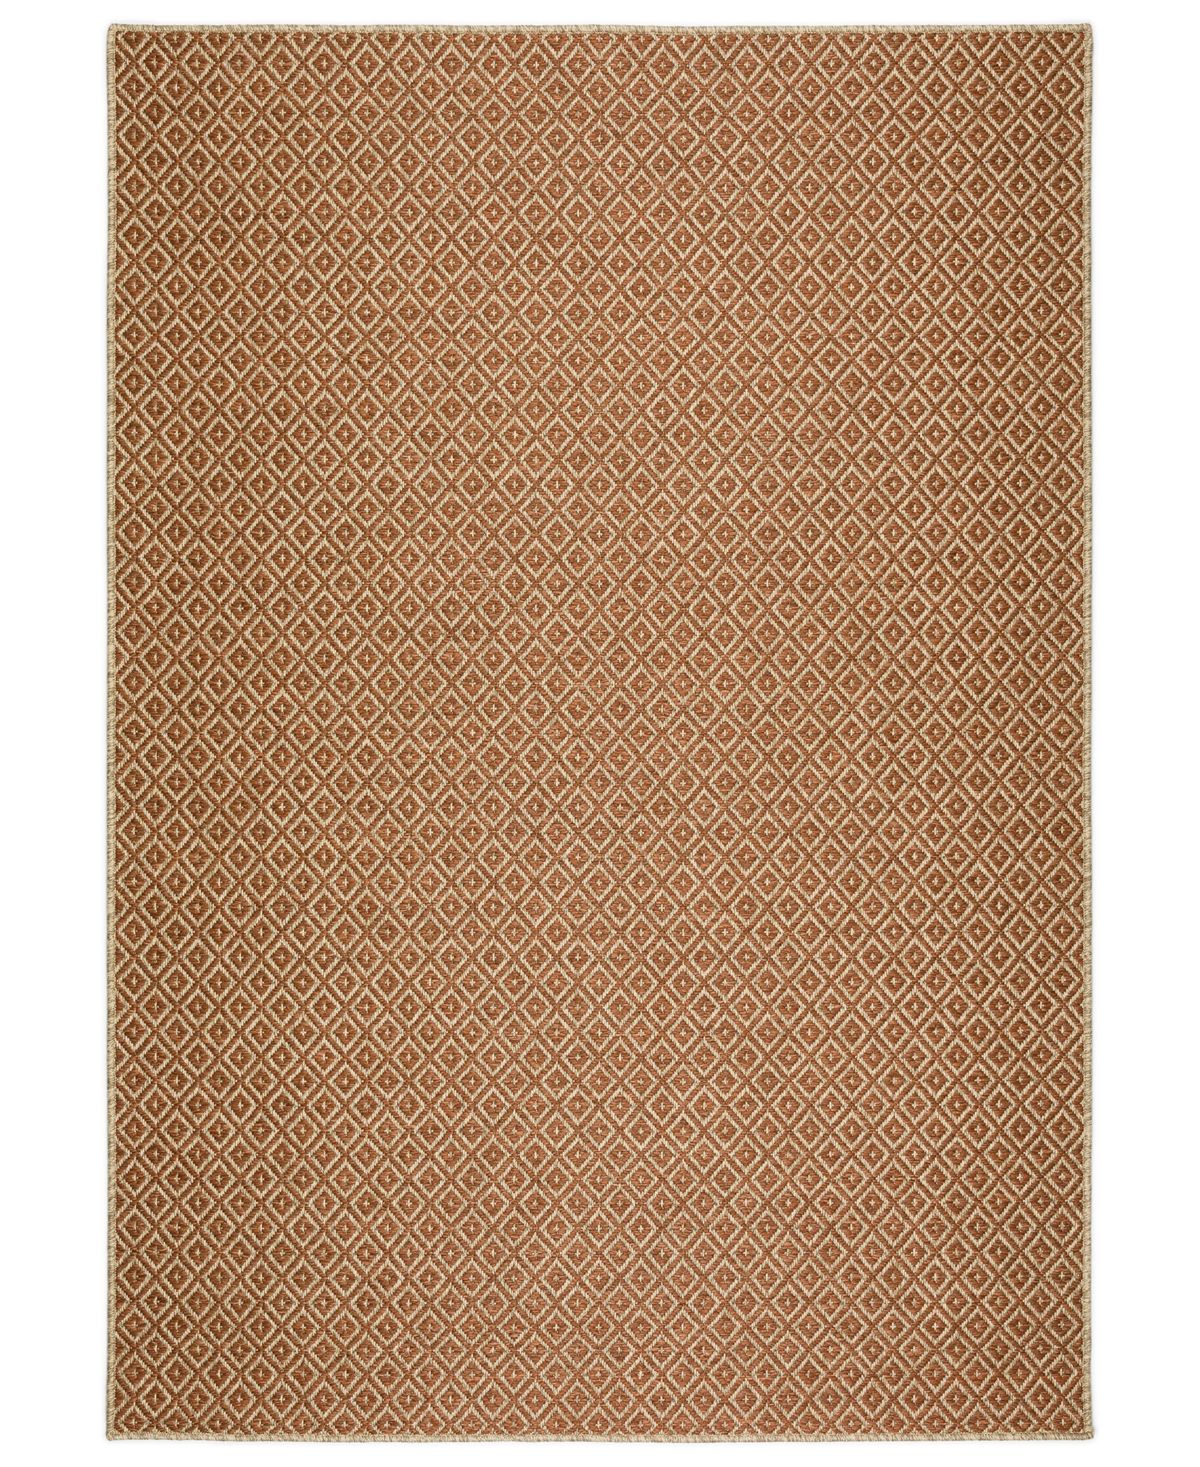 D Style Nusa Outdoor Nsa8 10' X 13' Area Rug In Paprika